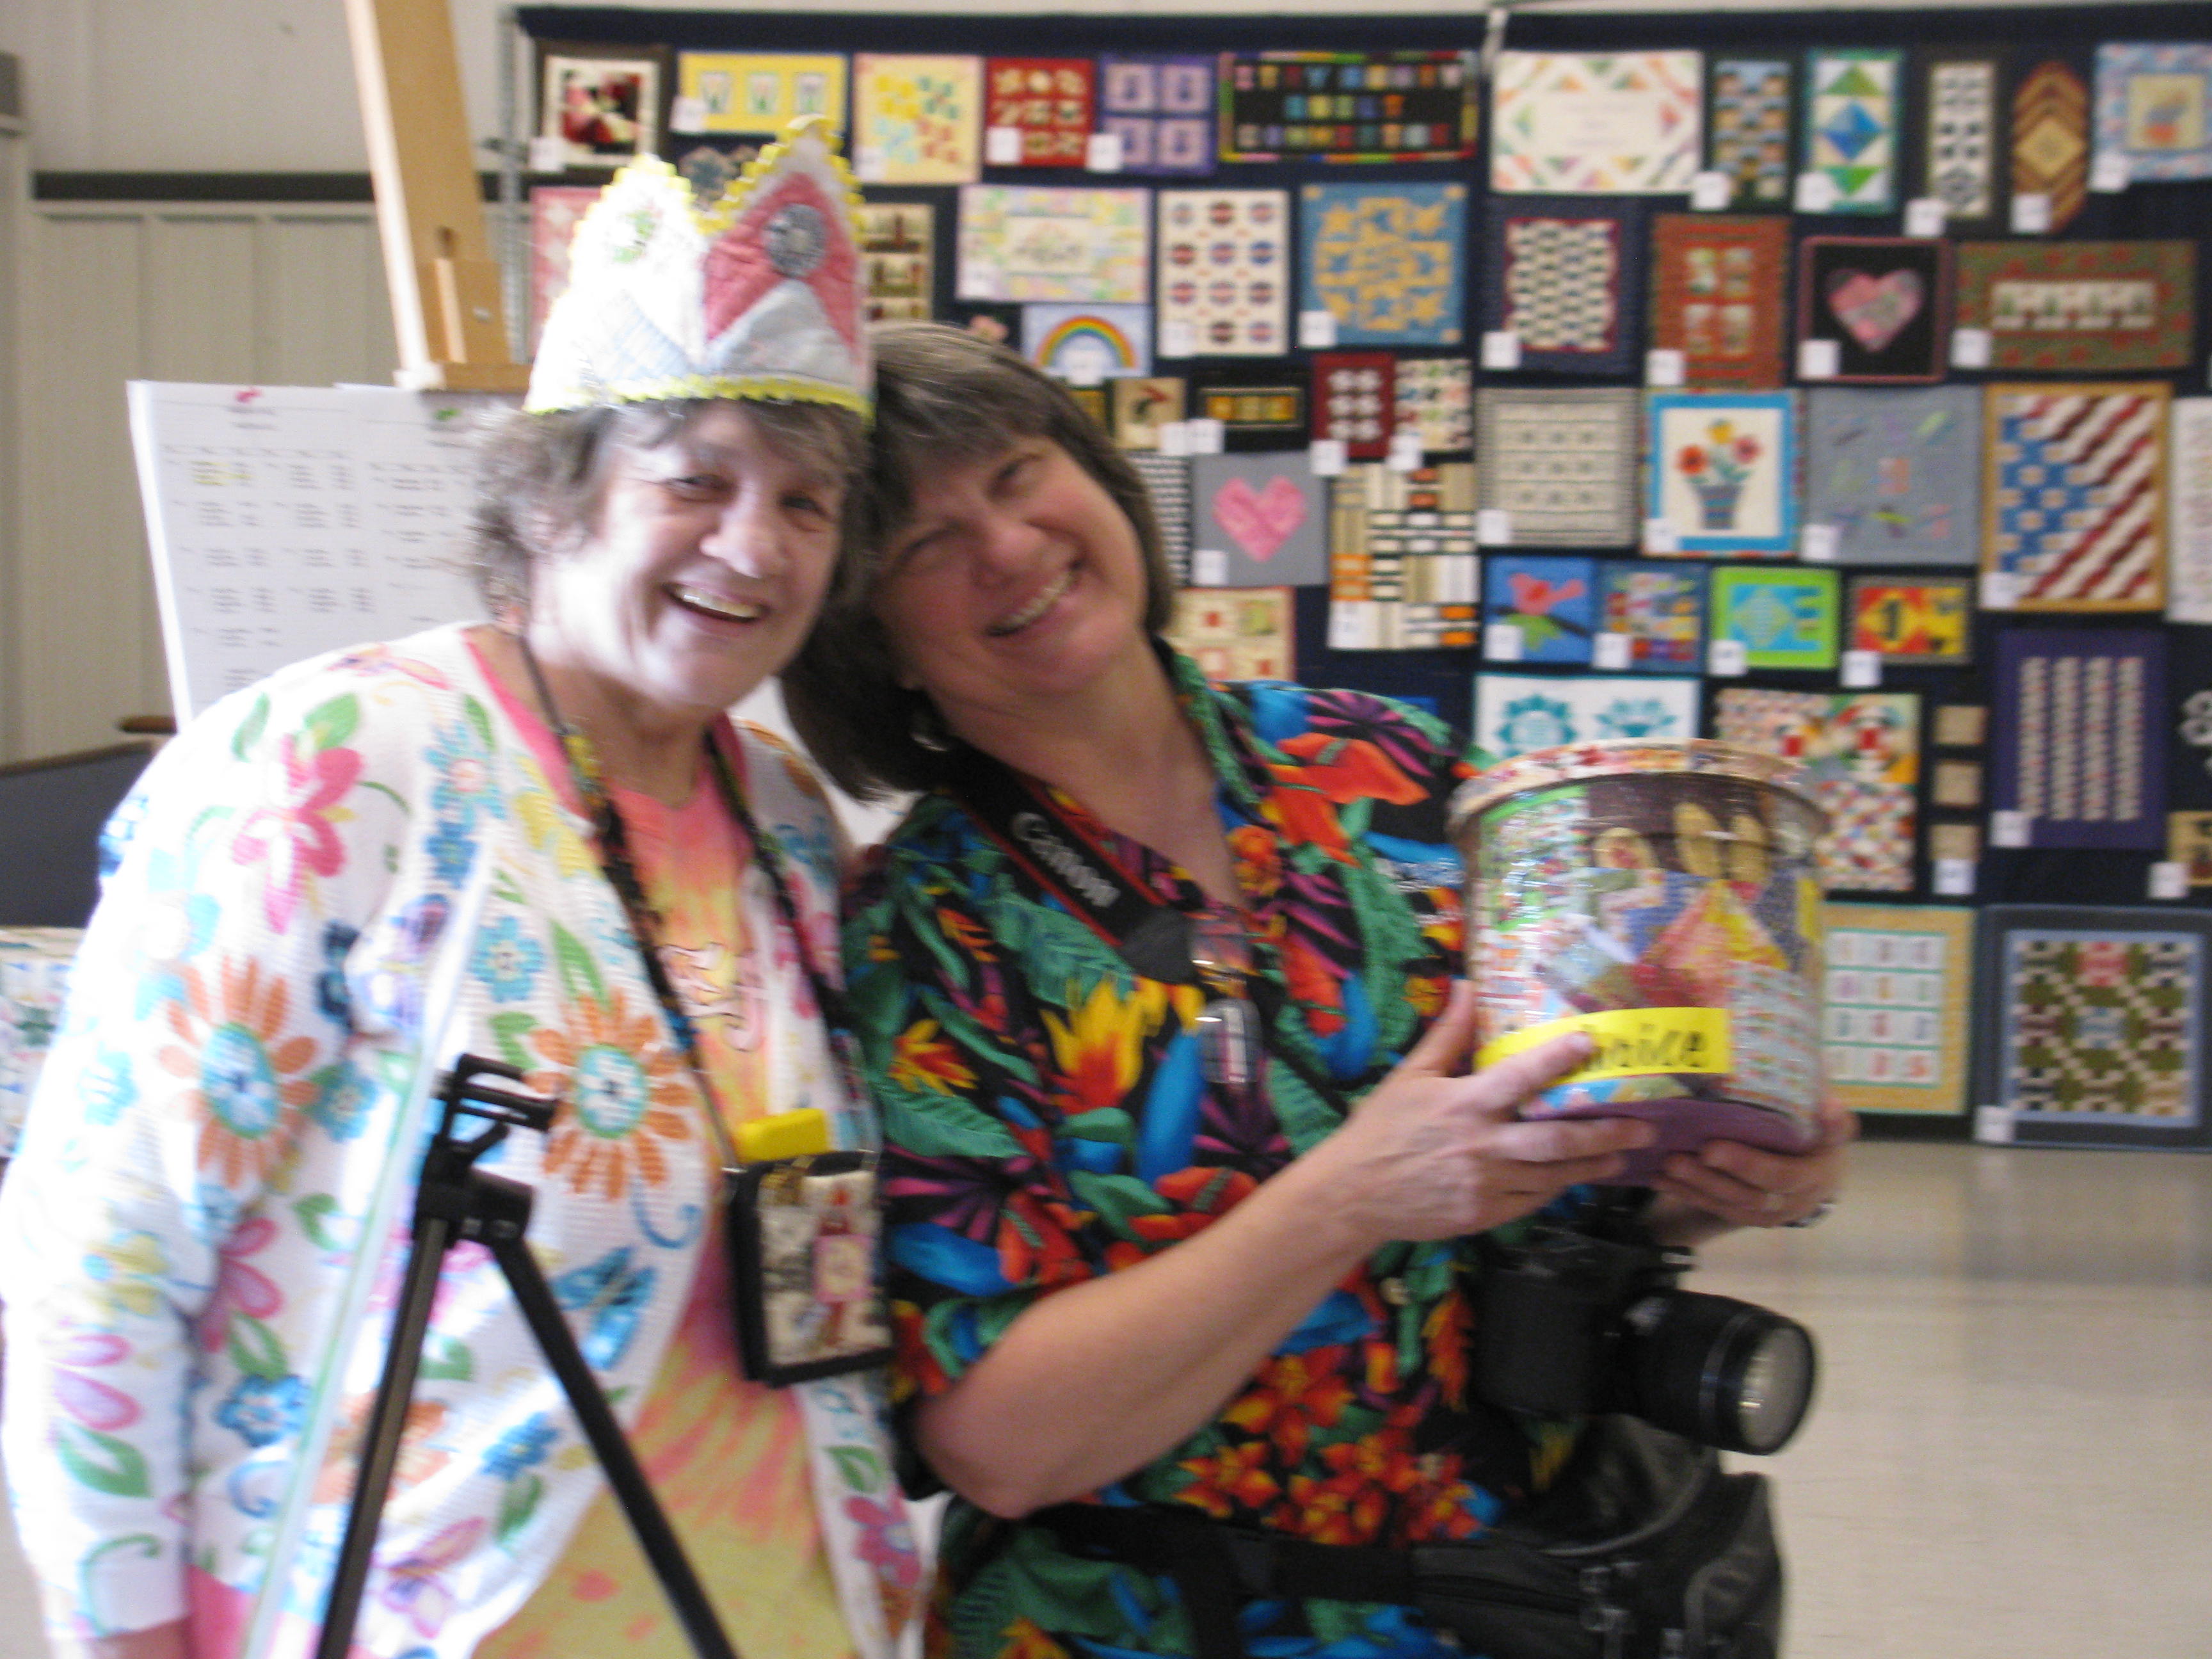 Our guild president at left (also reigning queen) and her quilt show chair, Diane Crandell, both giddy with enthusiasm at the 2015 quilt show.